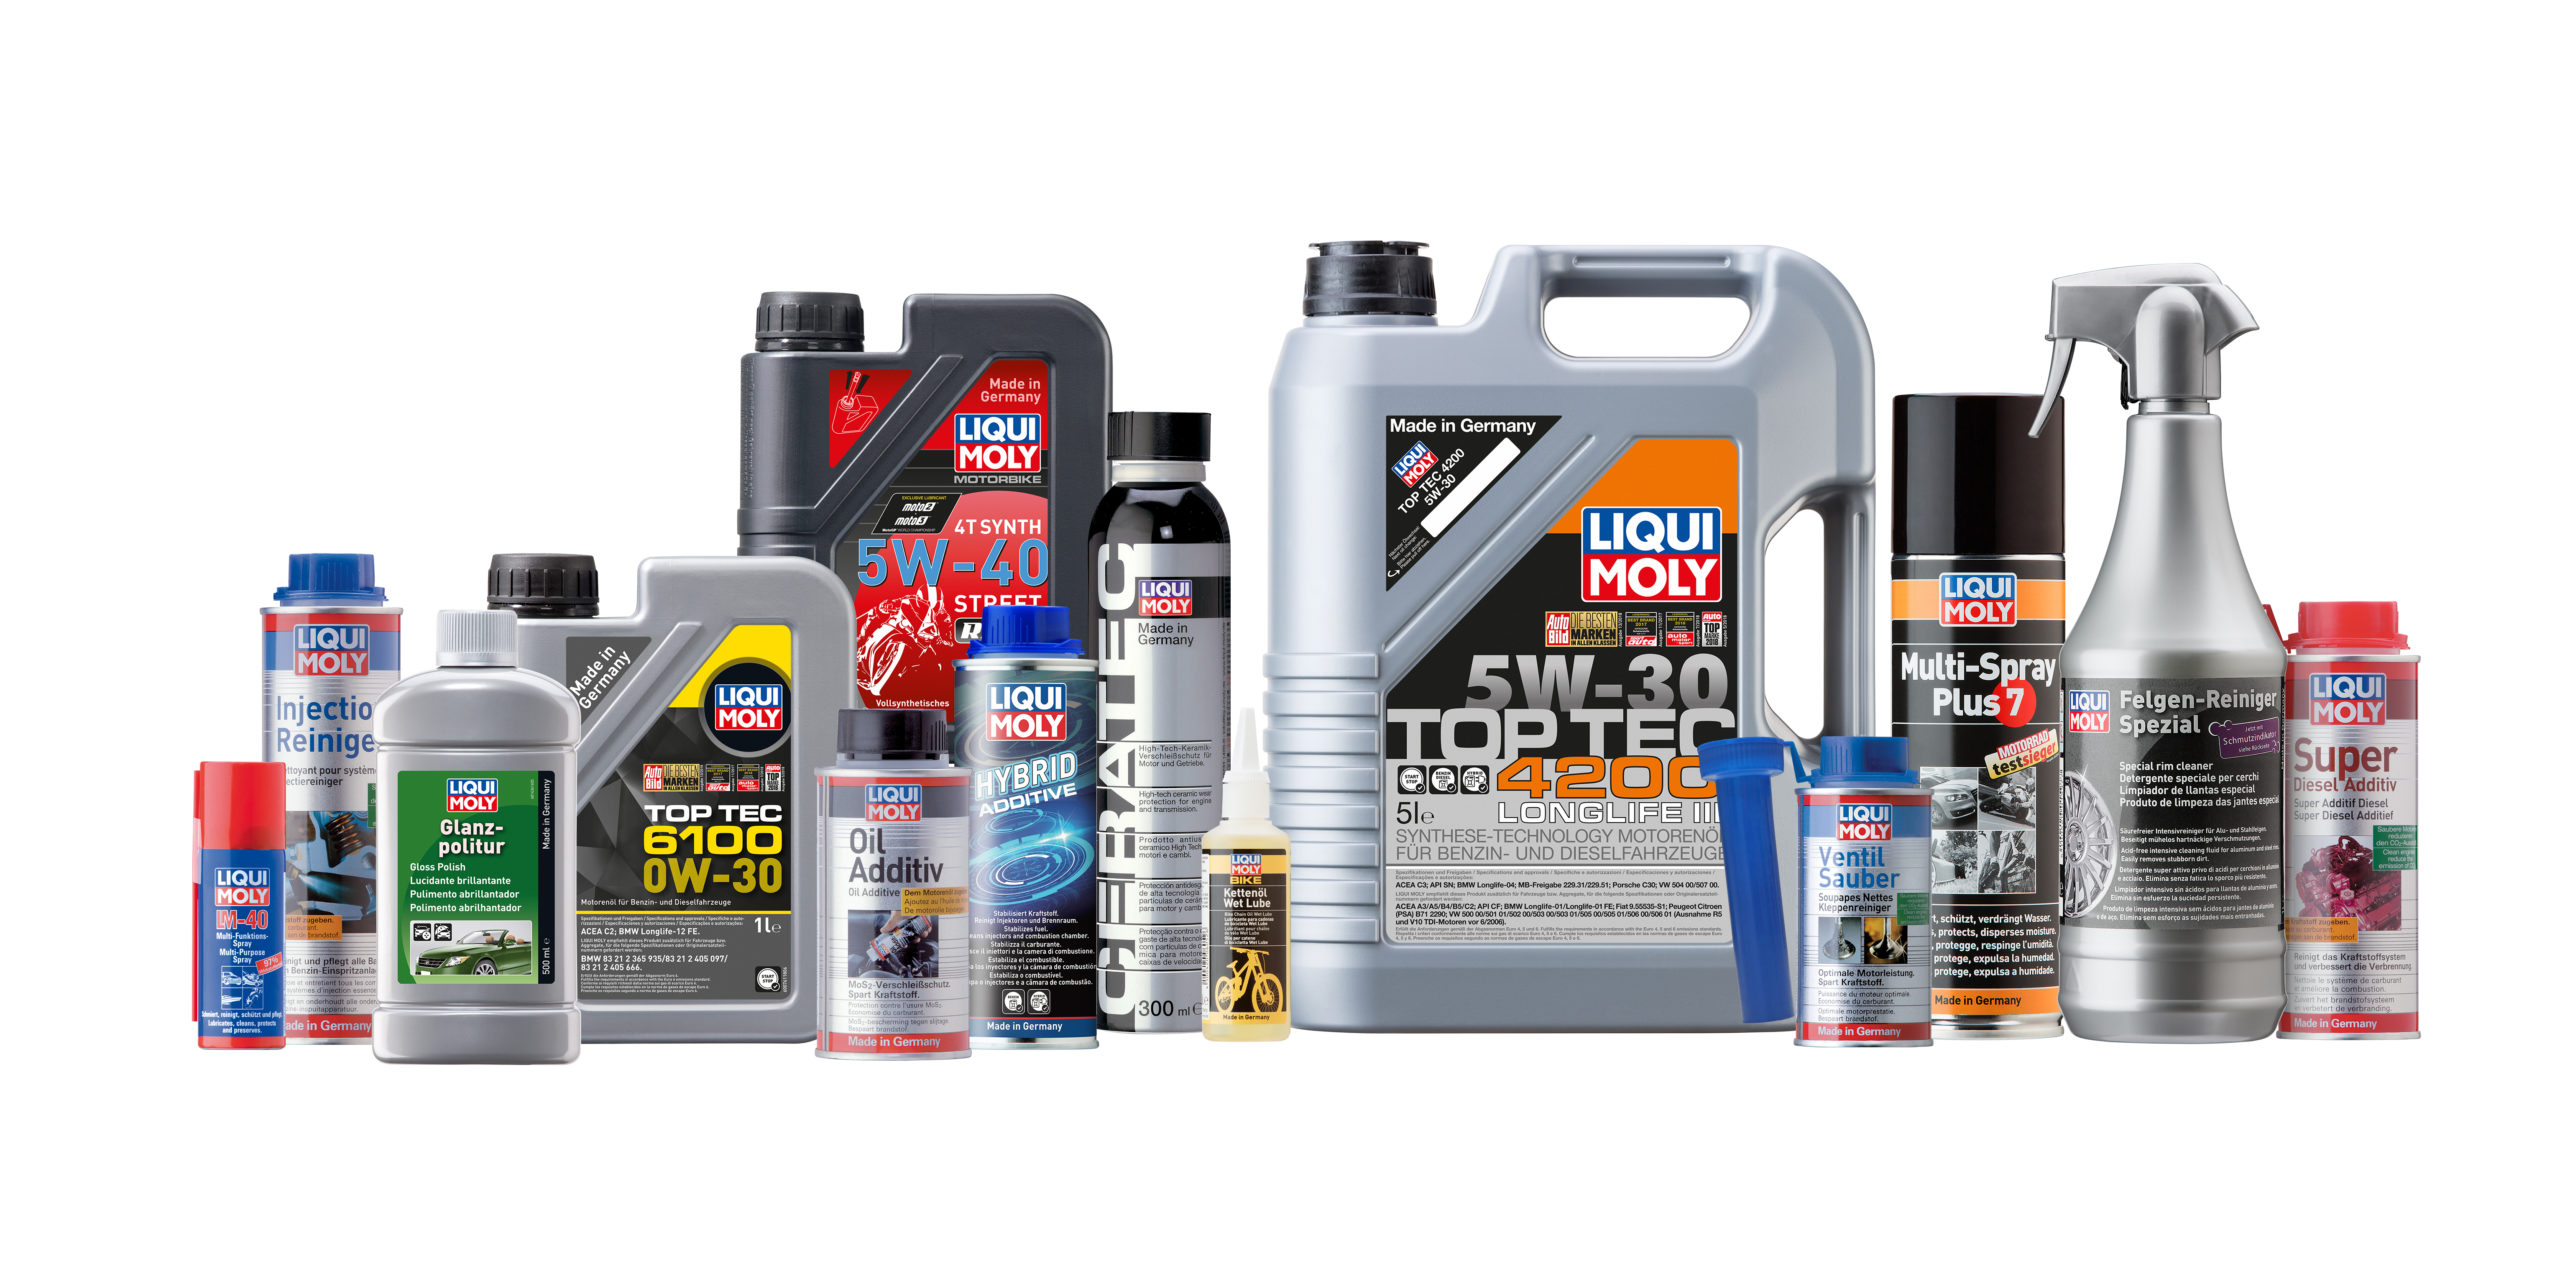 Simple, Overall – Liqui Moly Product Use